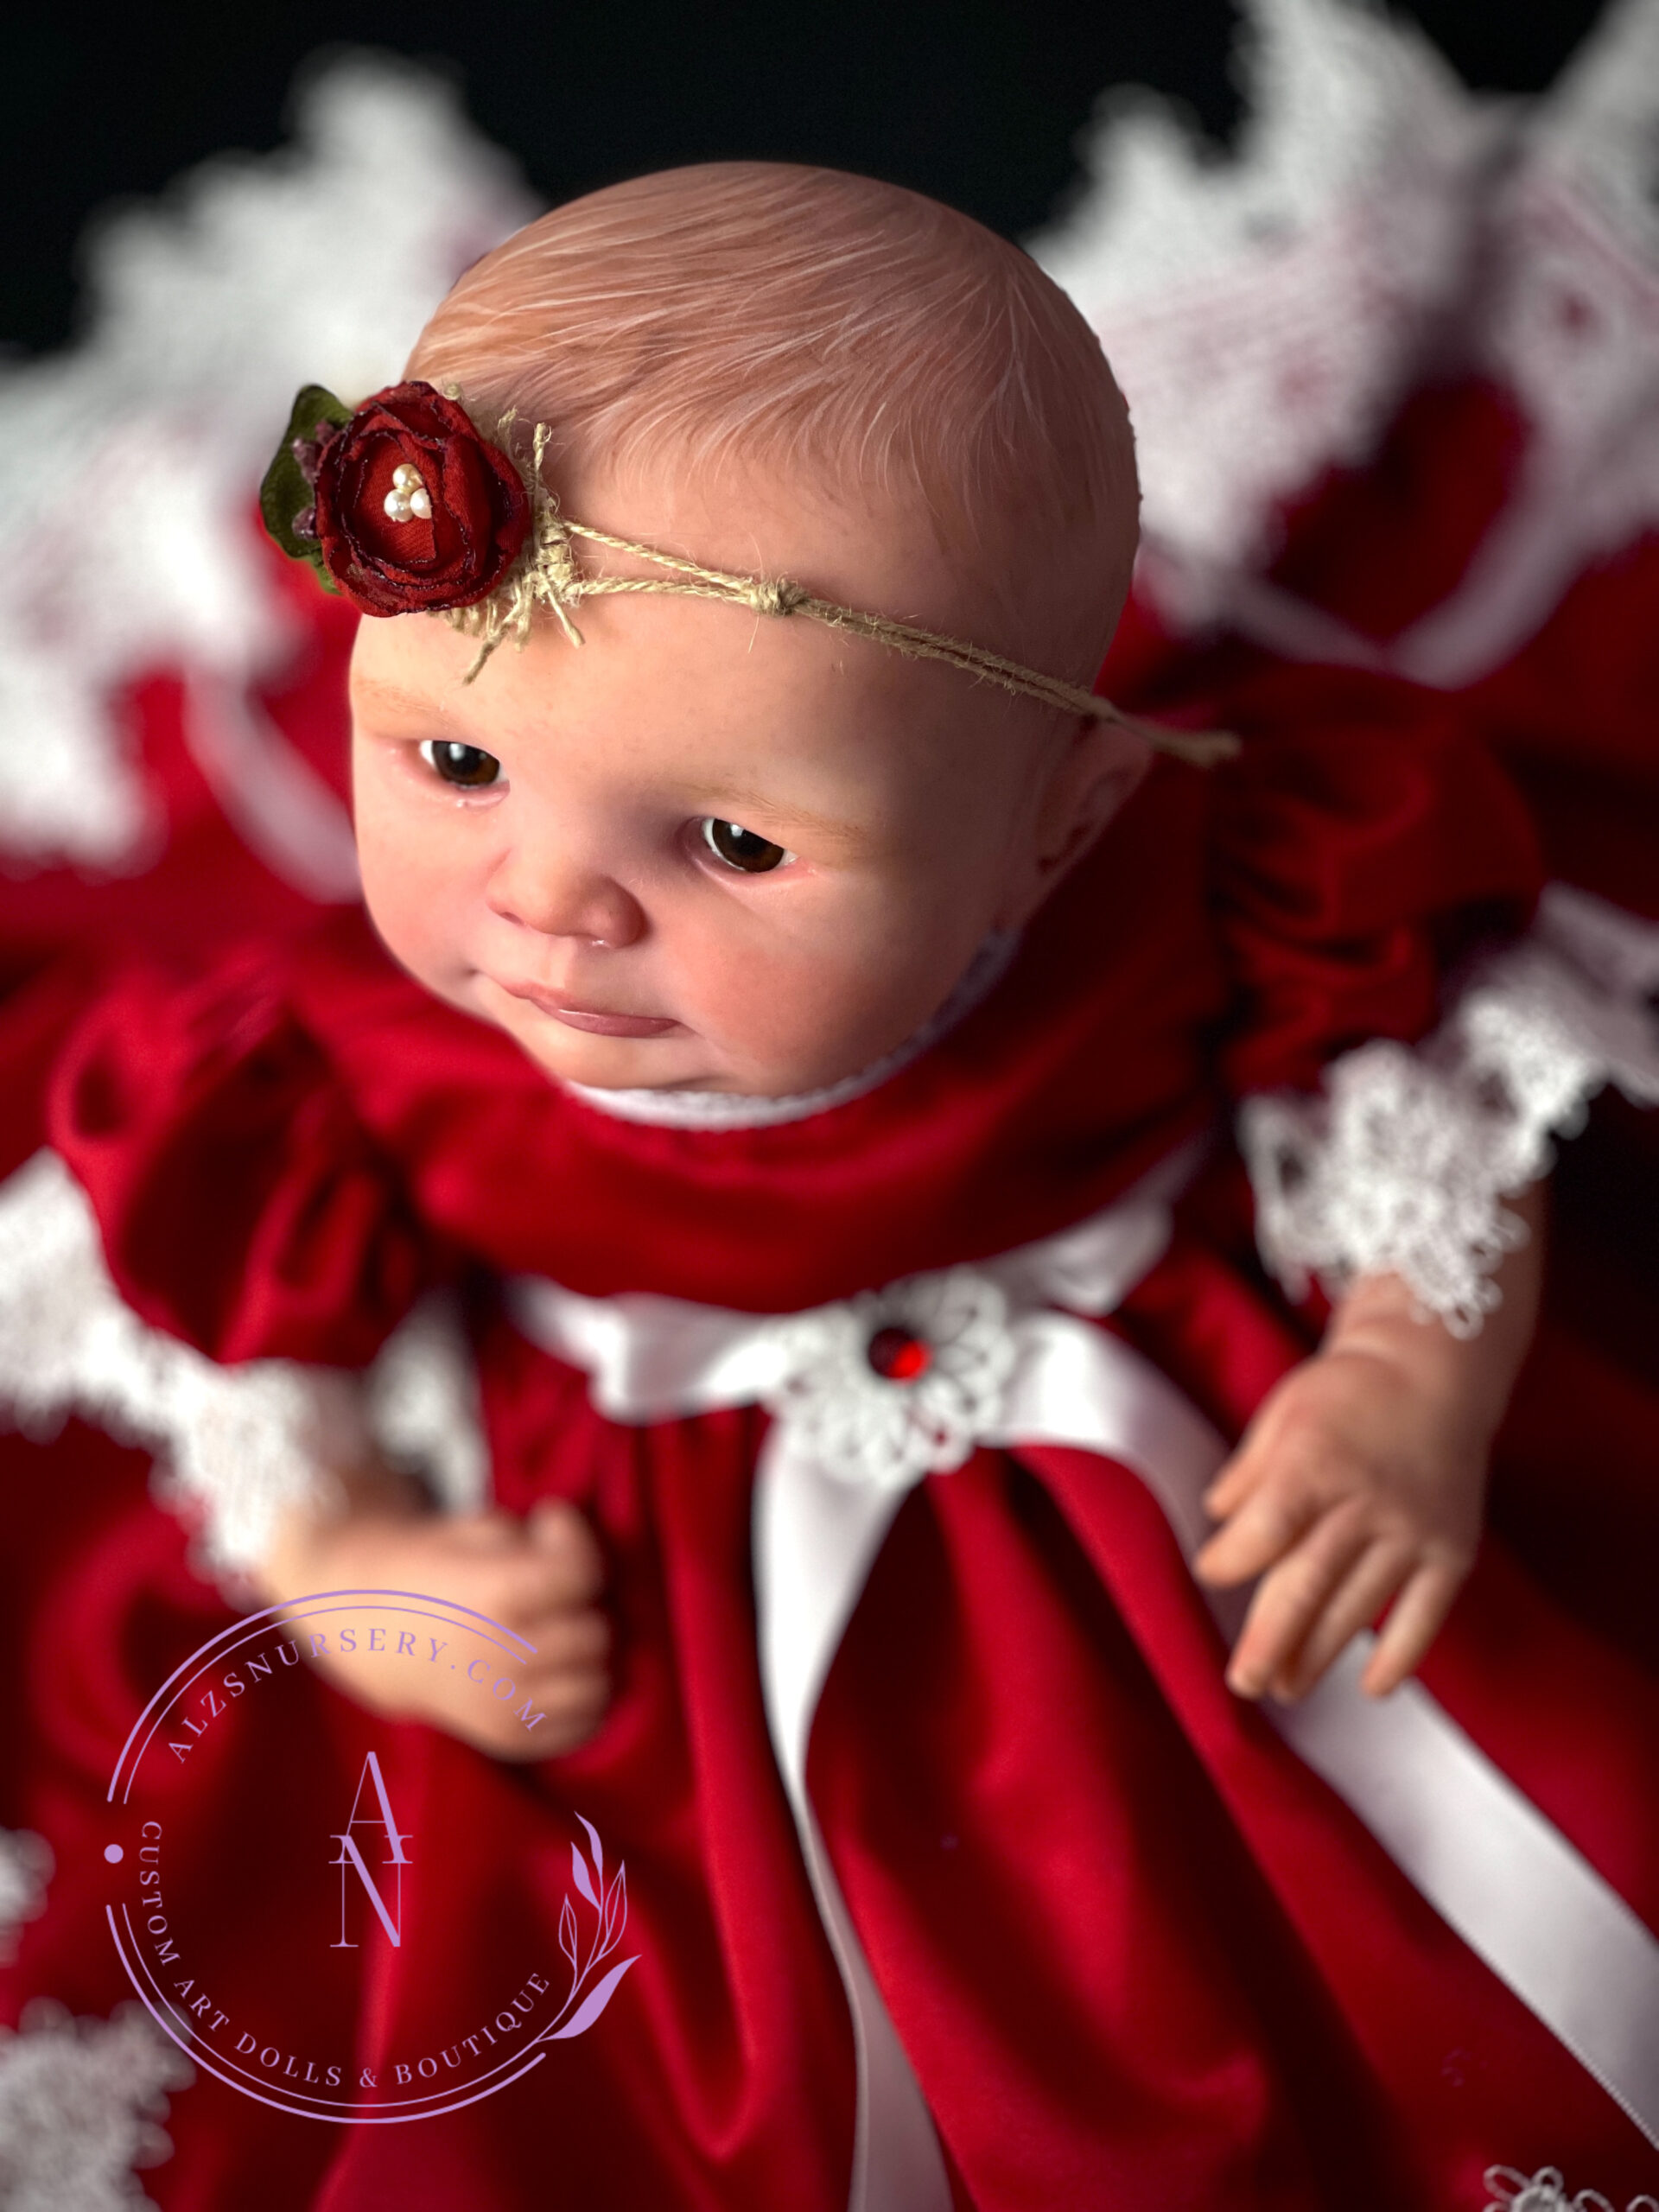 Gifted reborn baby "Daisy" LE Dinah sculpt by Talita Pinheiro, brought to life by Ginger Kelly with Alz's Nursery.